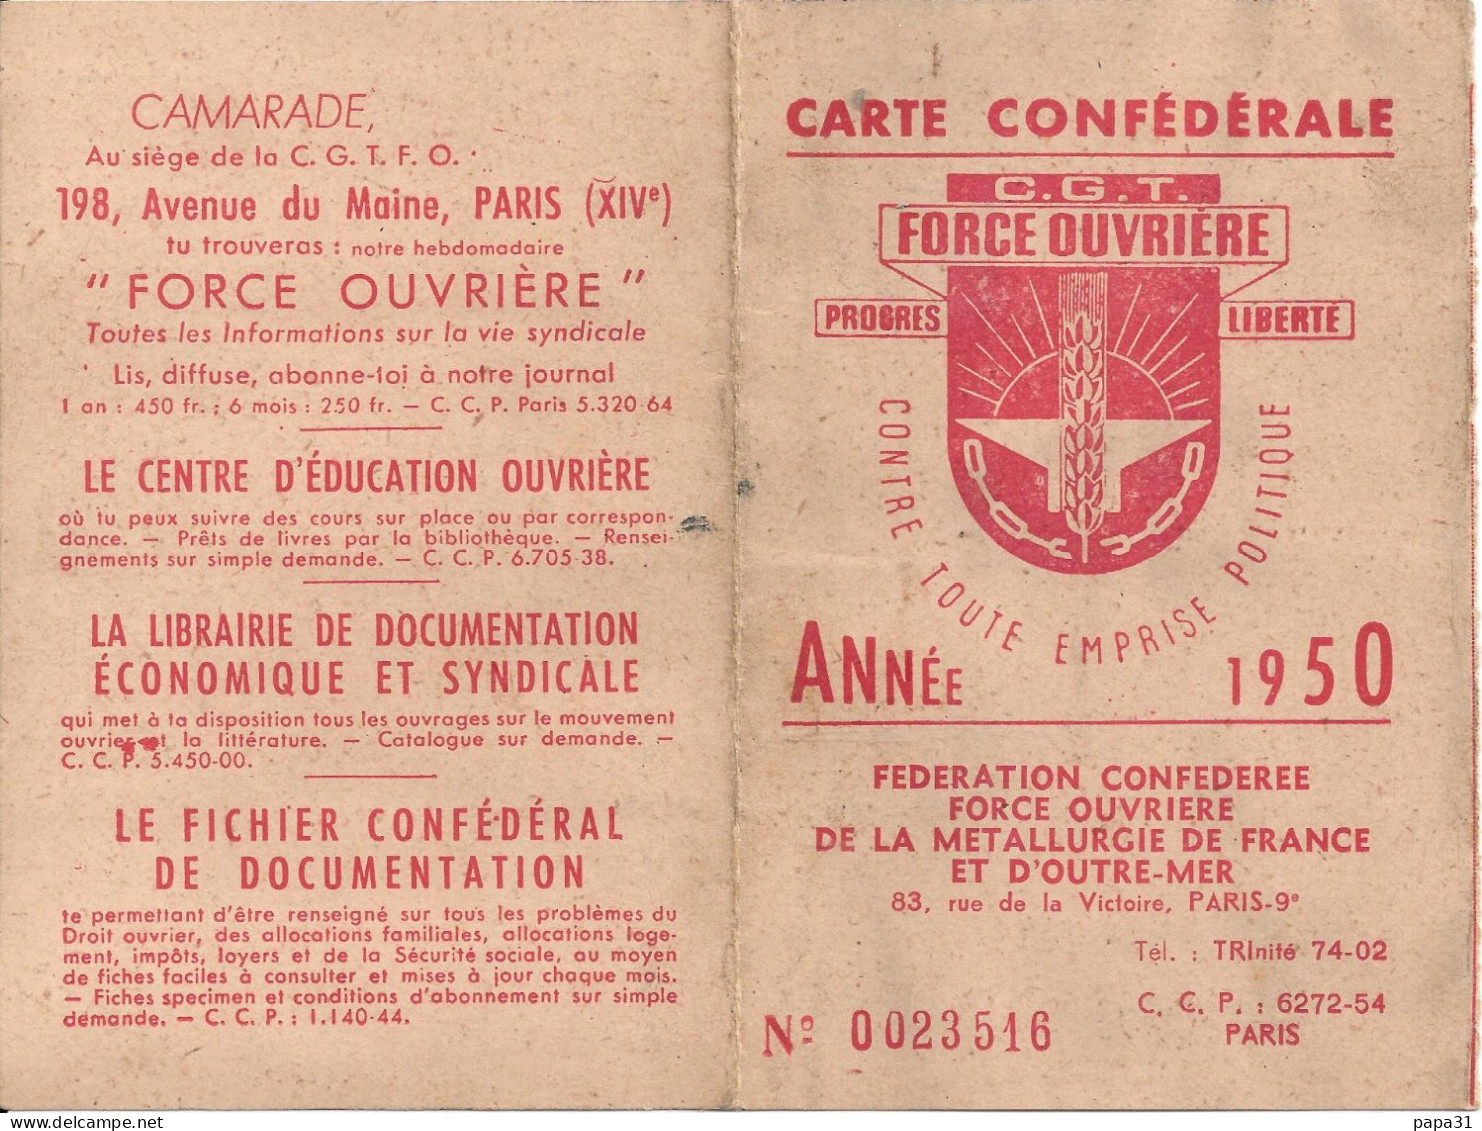 CARTE CONFEDERALE  - FORCE OUVRIERE  ANNEE 1950 - Membership Cards